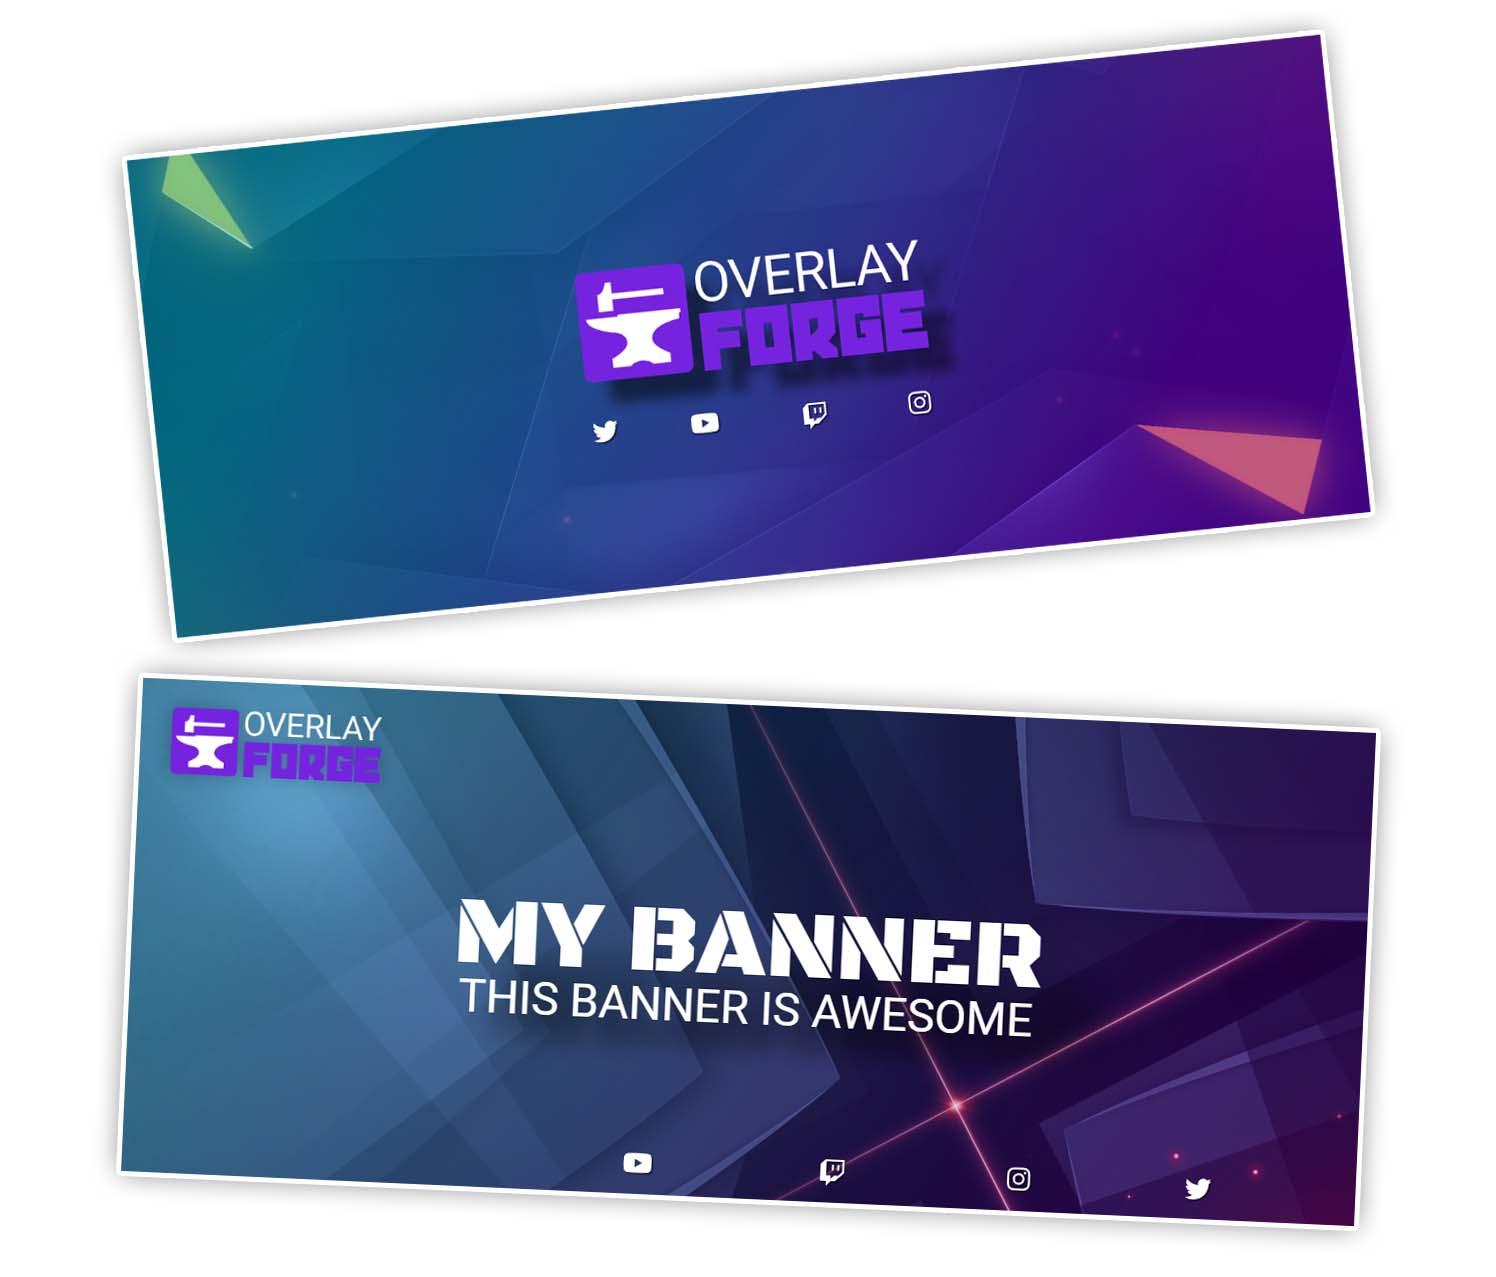 Sample Banners designed to match the Overlay Forge Branding